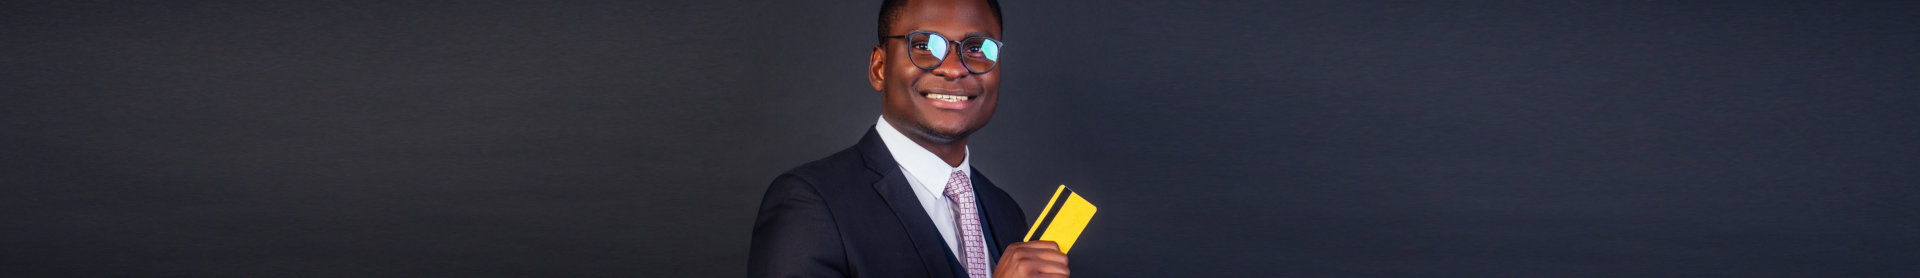 A man wearing suit and holding a credit card